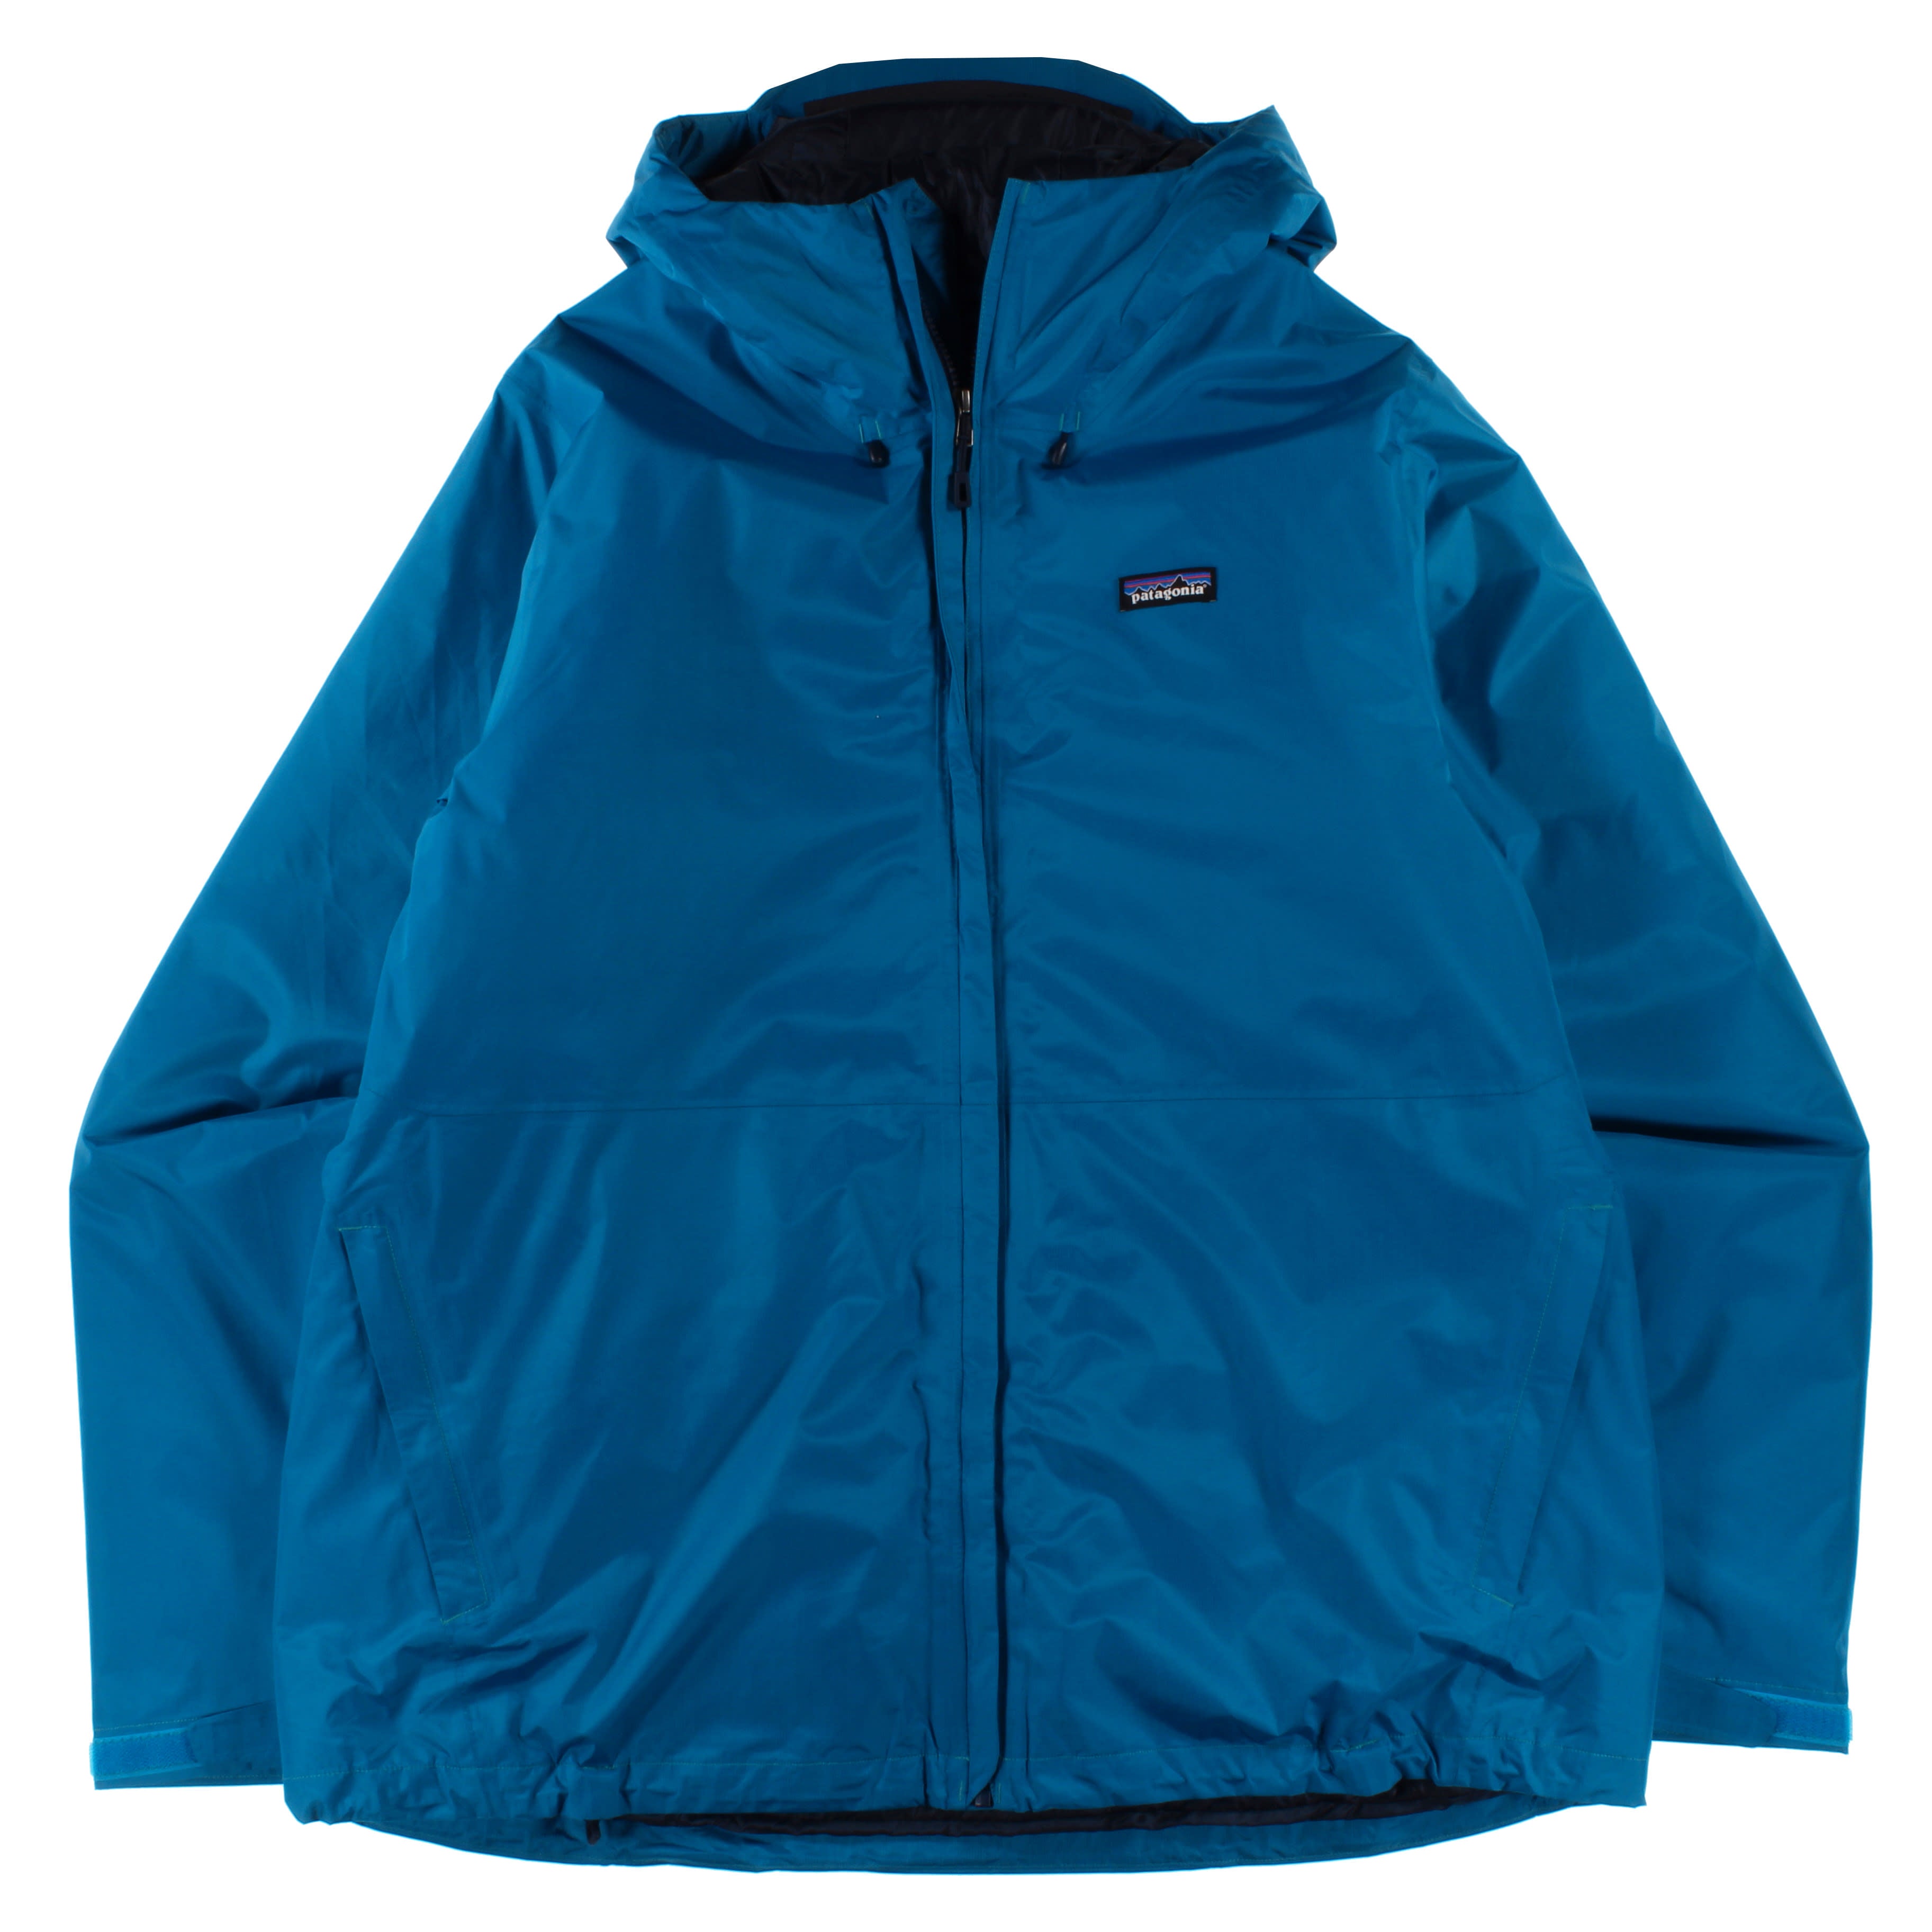 Patagonia Men's Insulated Torrentshell Jacket Clearance | www.c1cu.com